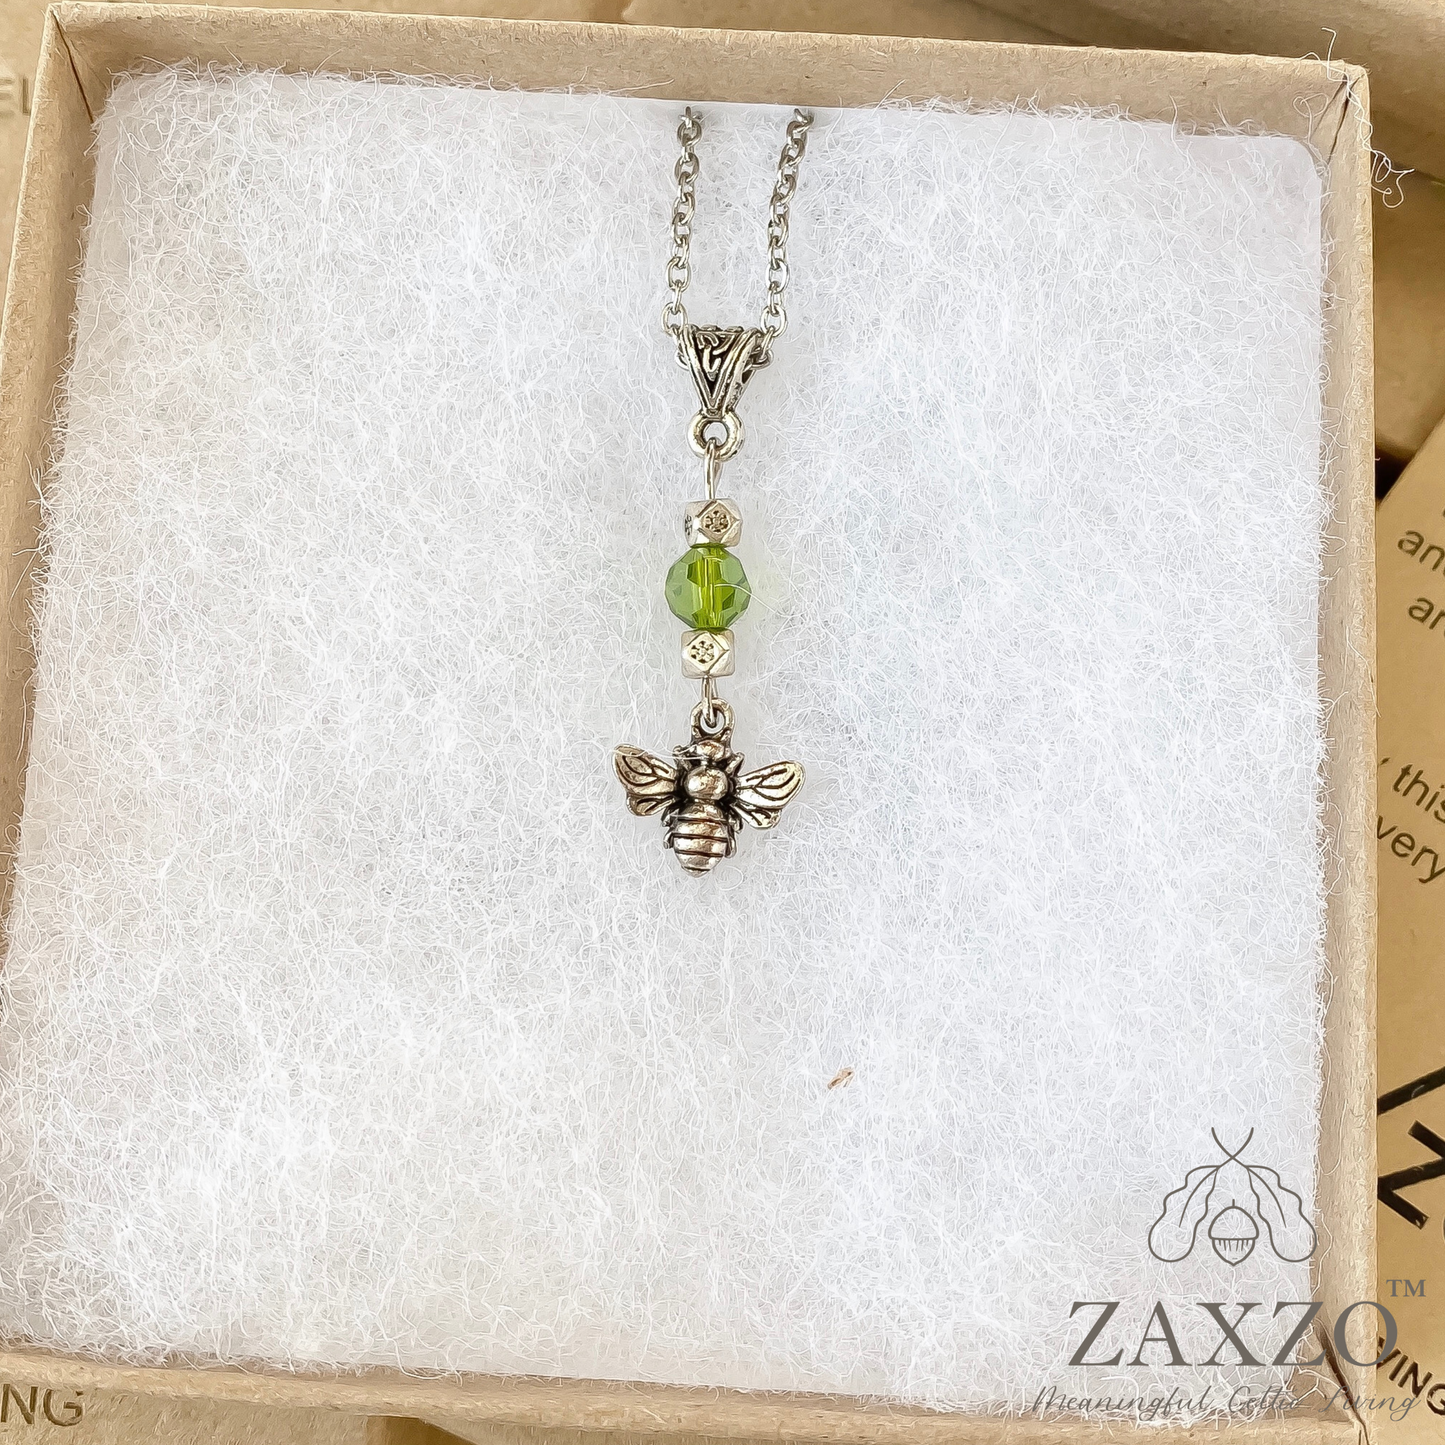 Scottish Bee Necklace with Green Czech Bead.